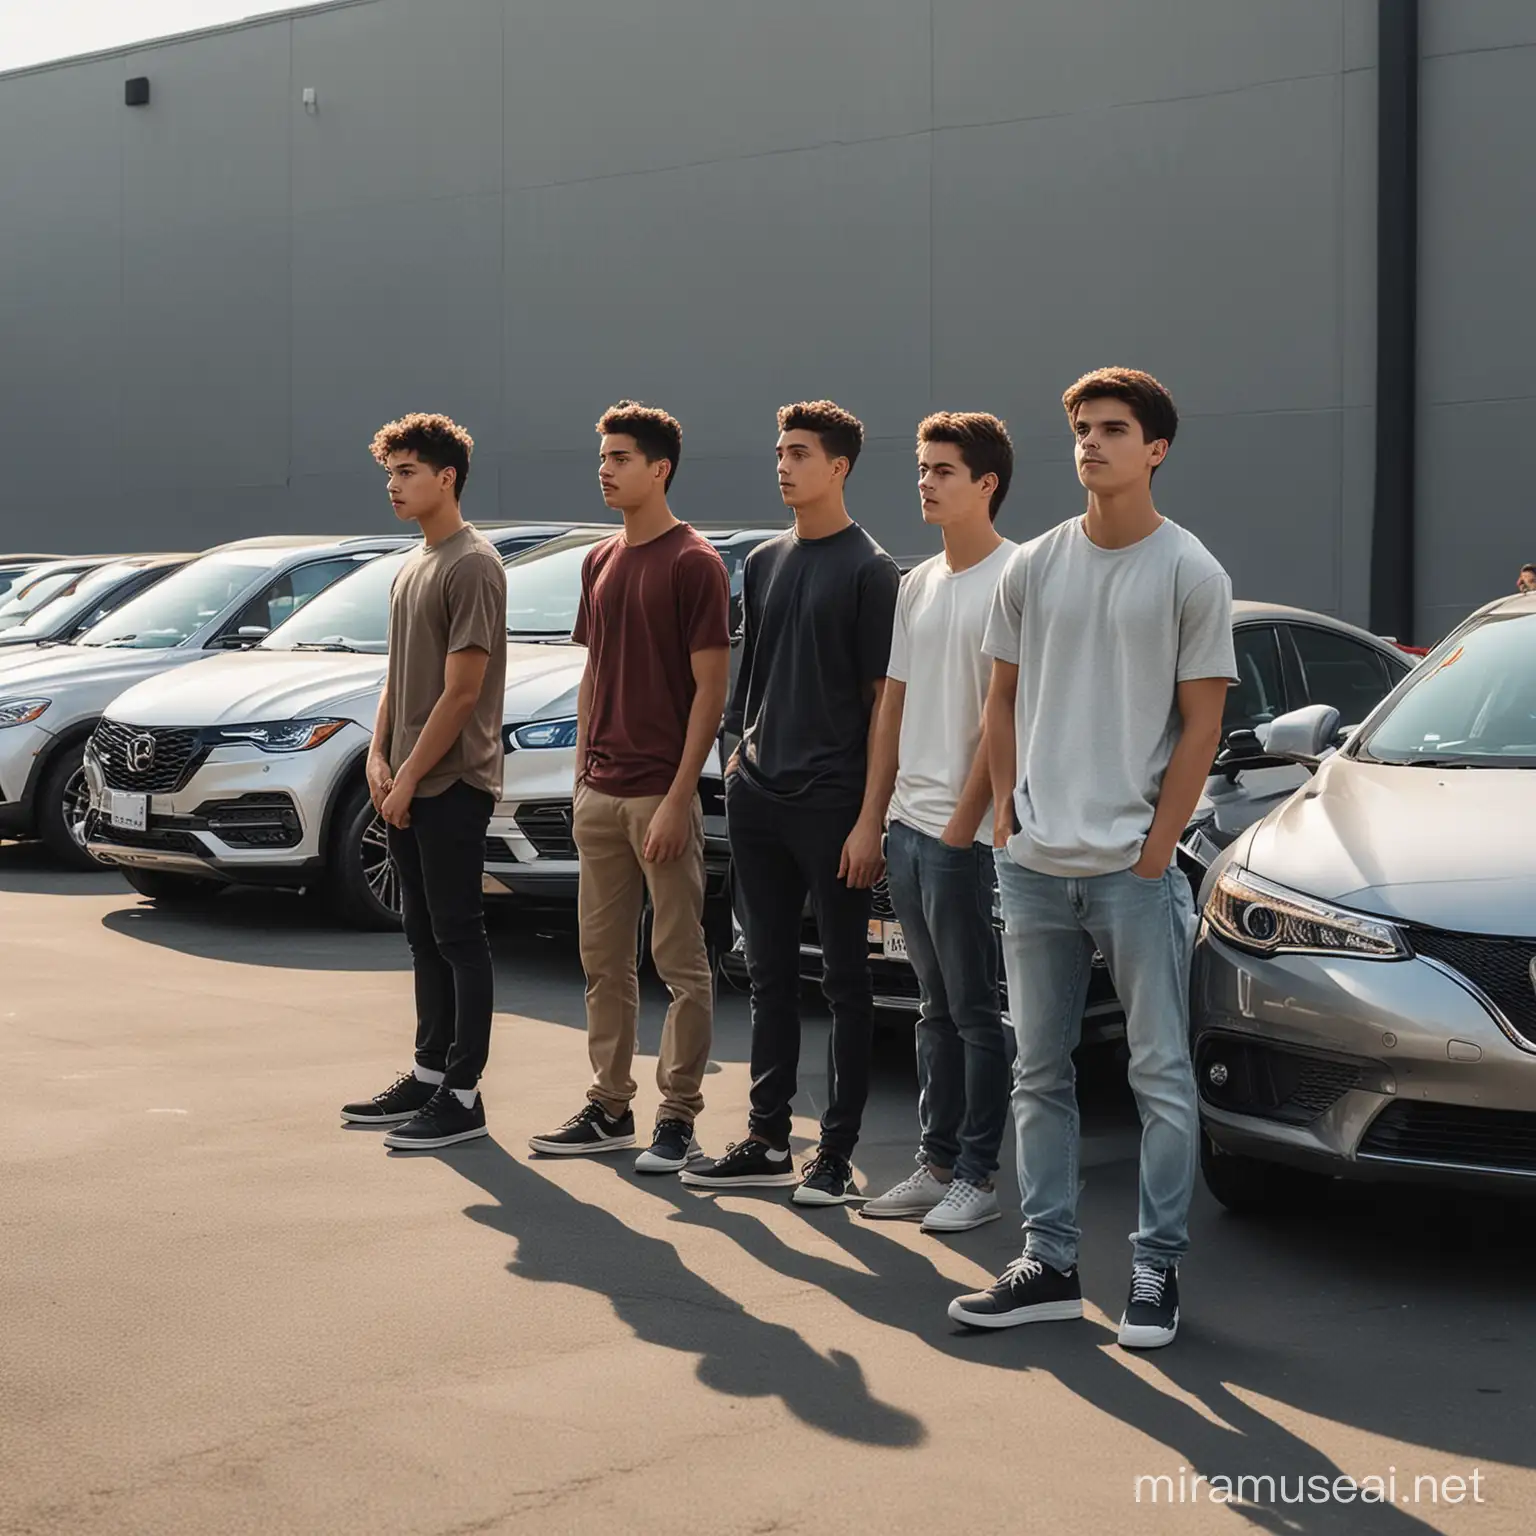 Generate a picture that took 4 physically fit male teenagers from the back looking at 4 different brand new cars in front of them